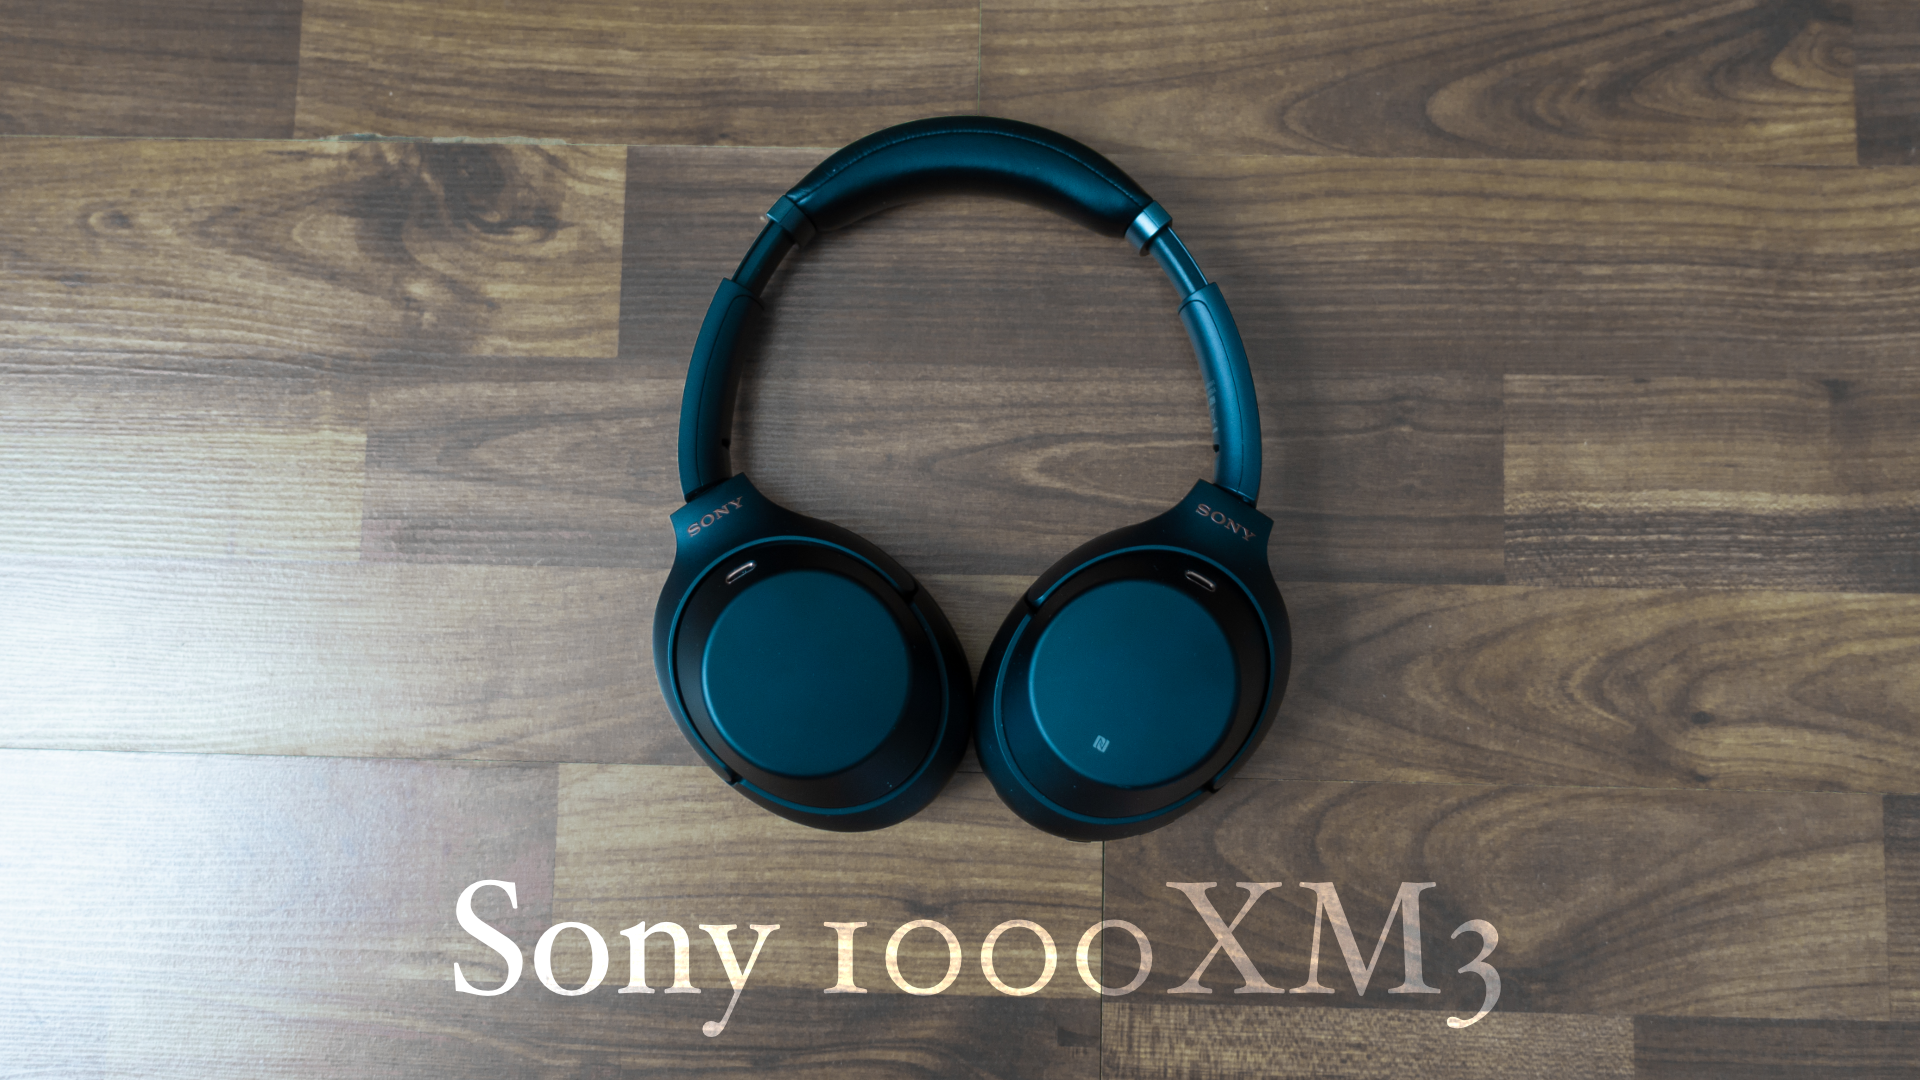 Sony’s 1000XM3 Noise Cancelling Headphones, One Year Review